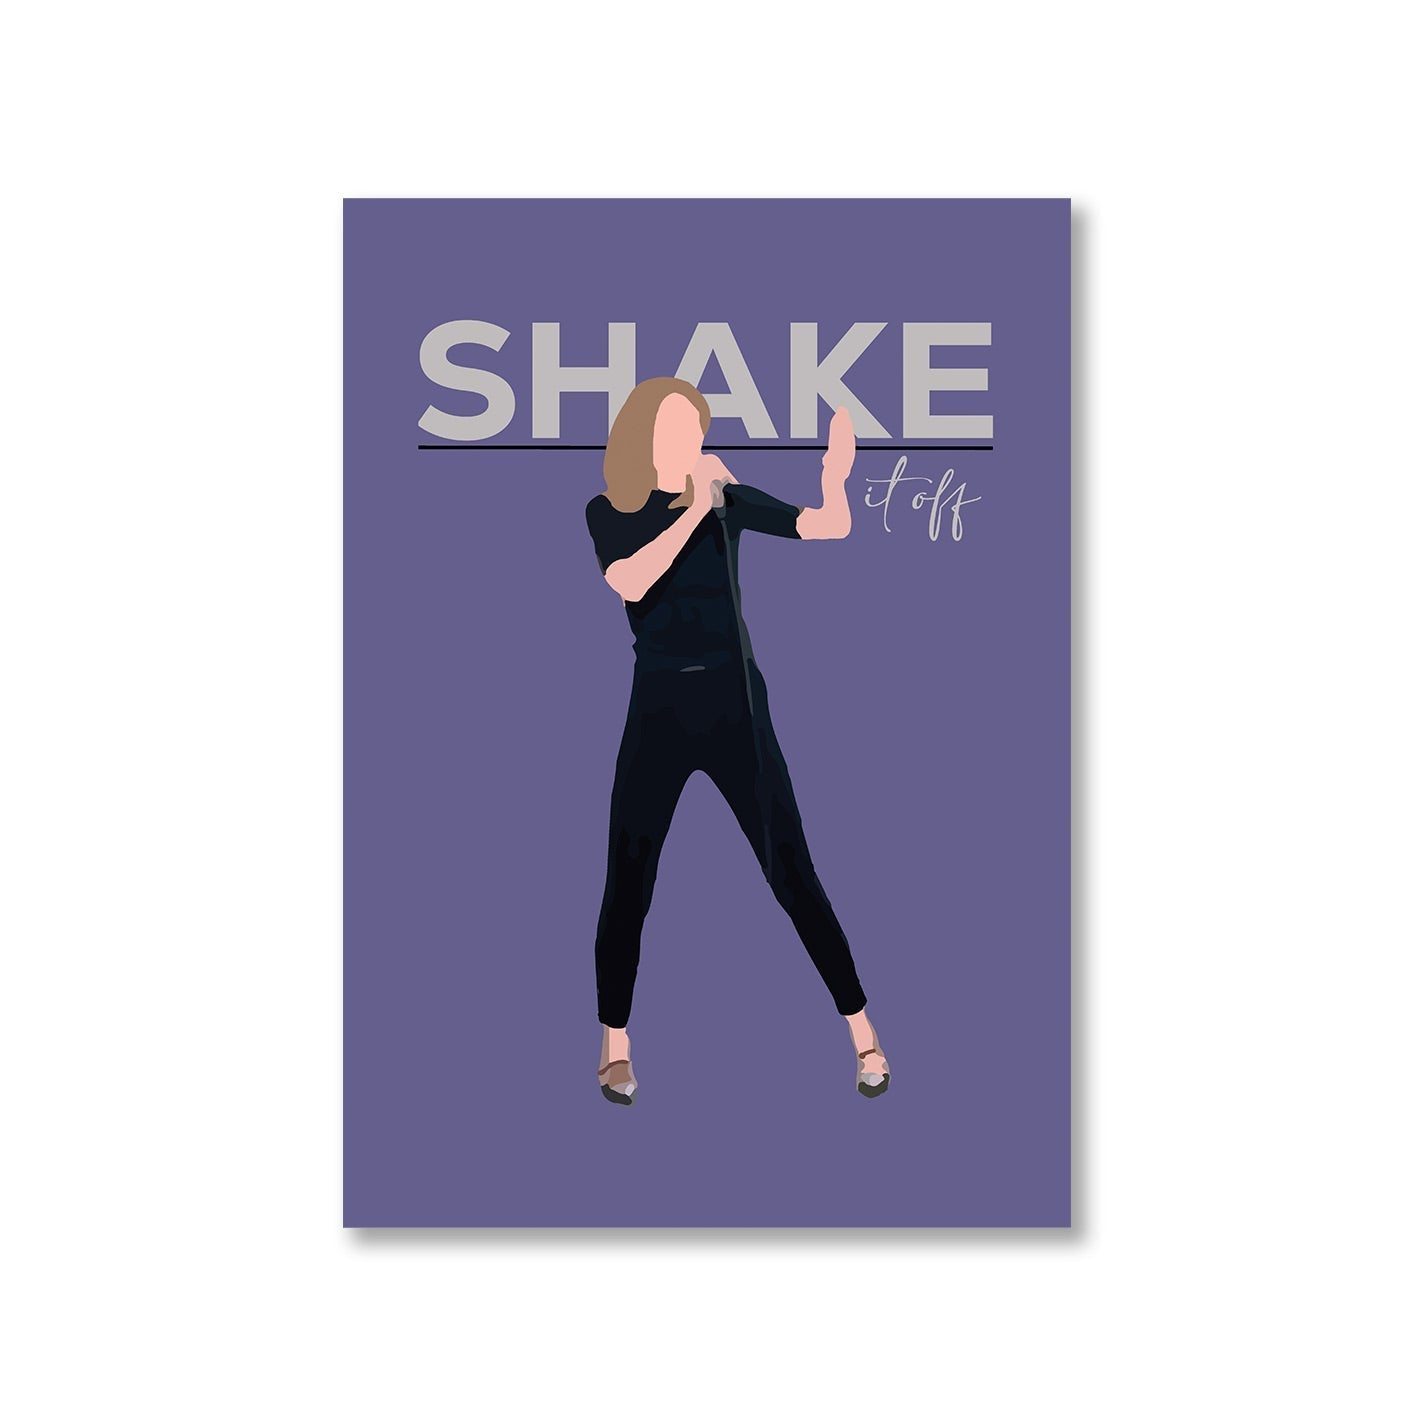 taylor swift shake it off poster wall art buy online united states of america usa the banyan tee tbt a4